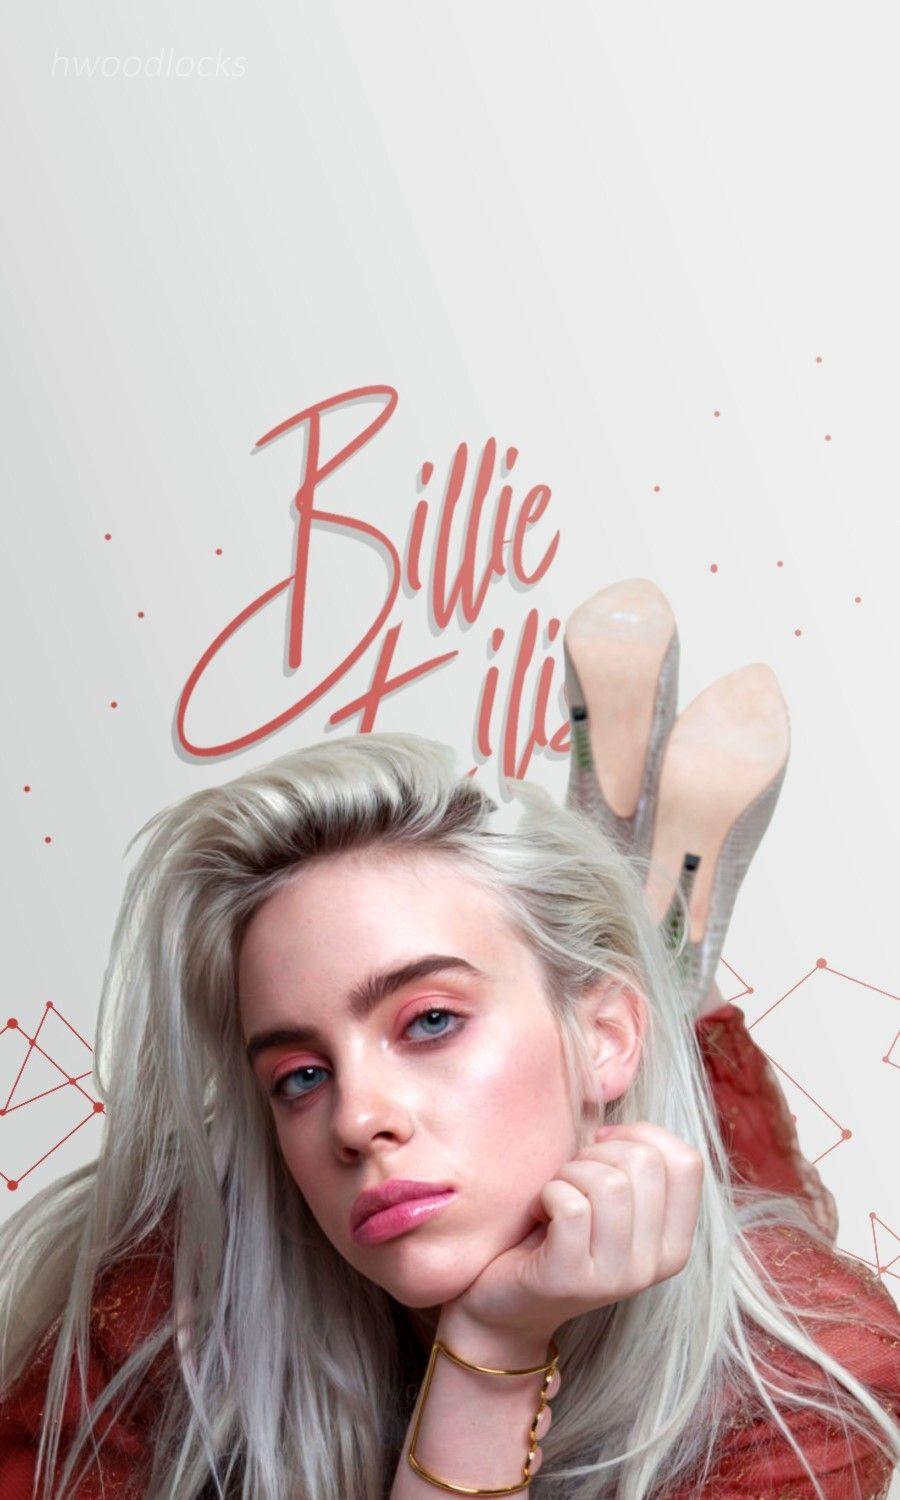 10 Choices billie eilish wallpaper aesthetic hd You Can Use It Without ...